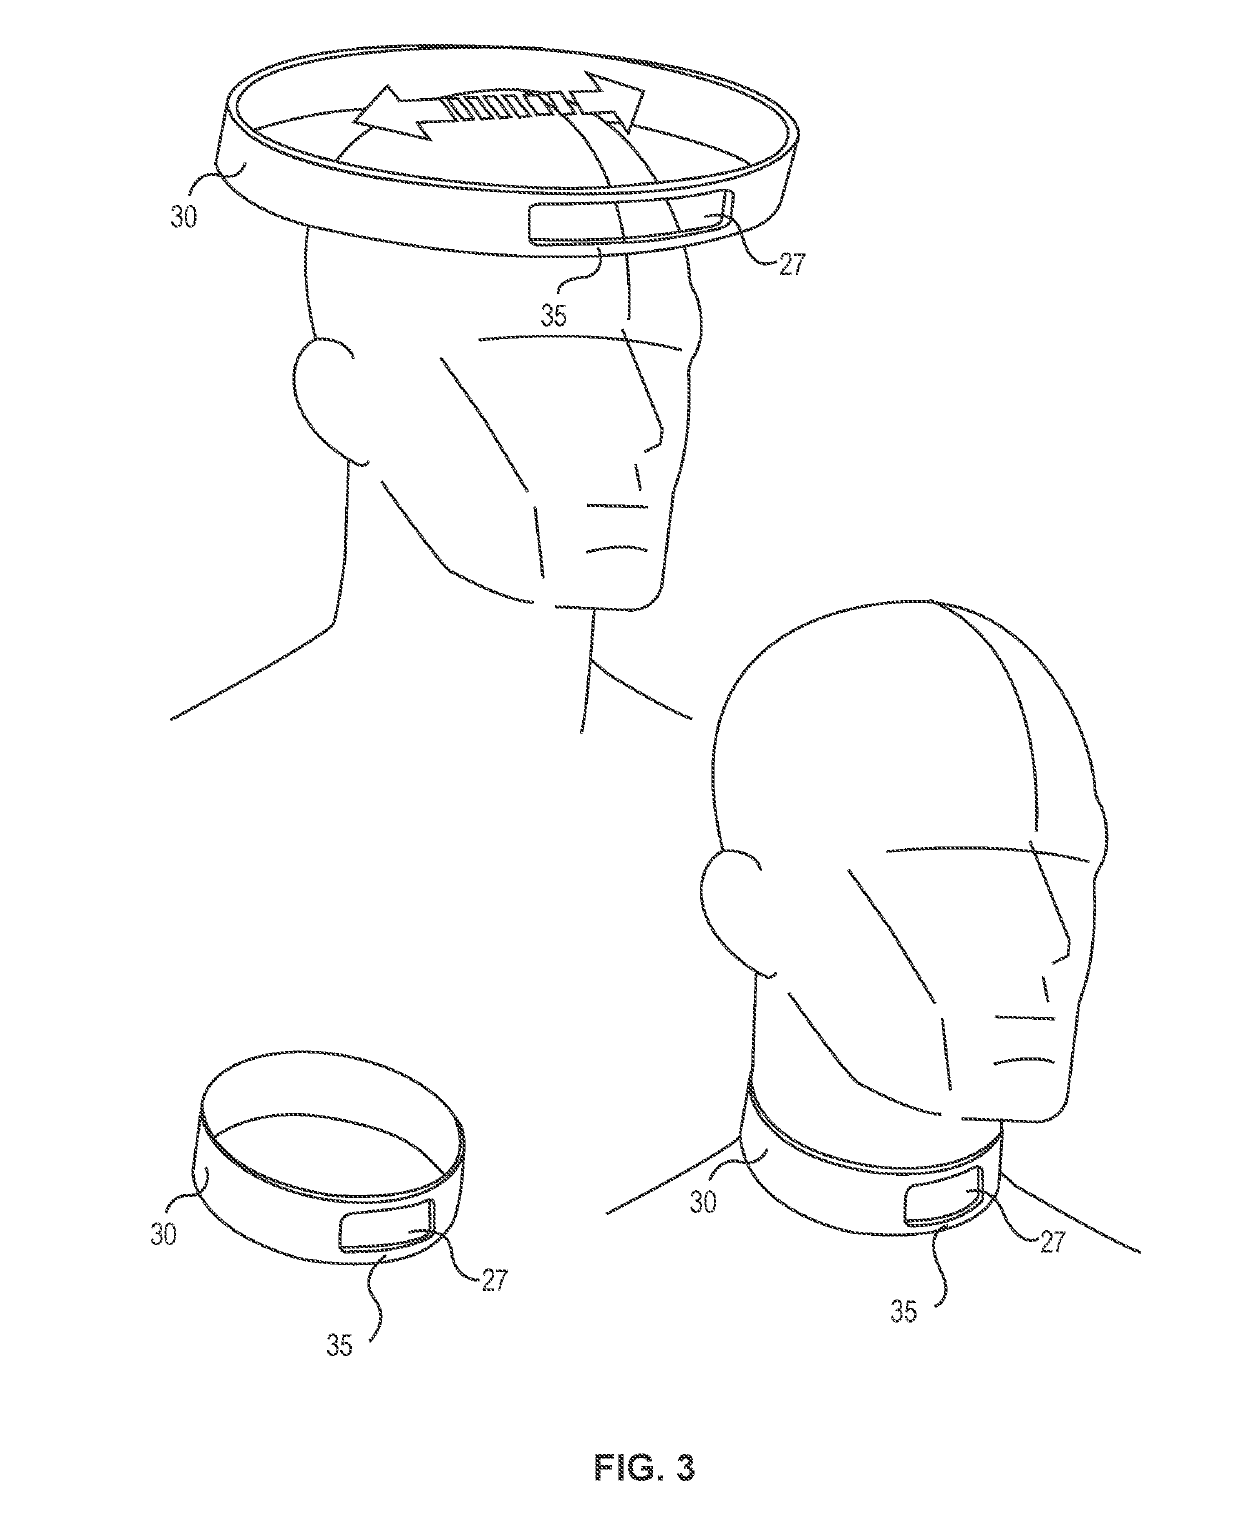 Methods and devices to reduce damaging effects of concussive or blast forces on a subject